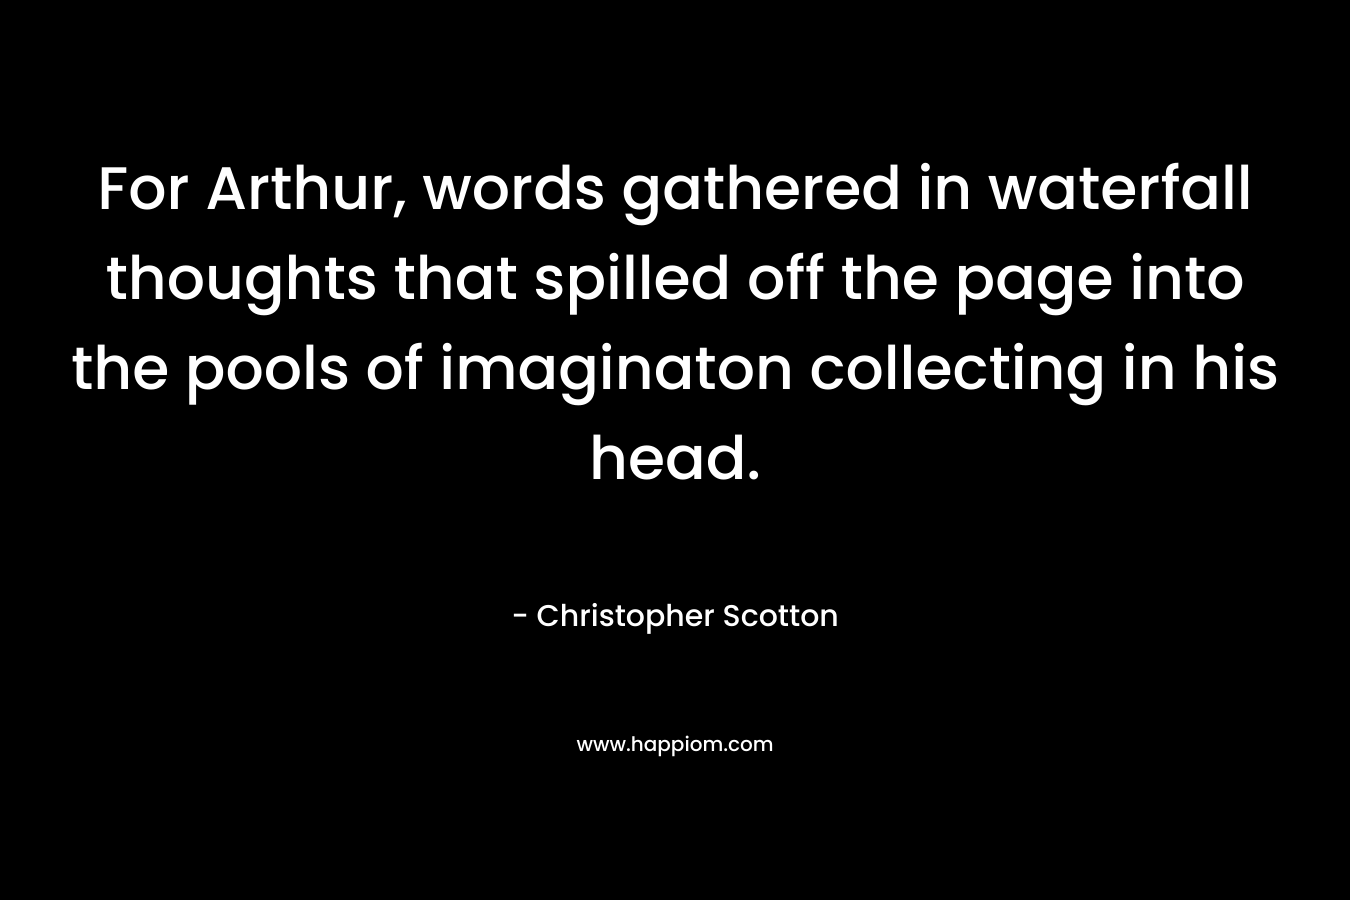 For Arthur, words gathered in waterfall thoughts that spilled off the page into the pools of imaginaton collecting in his head.